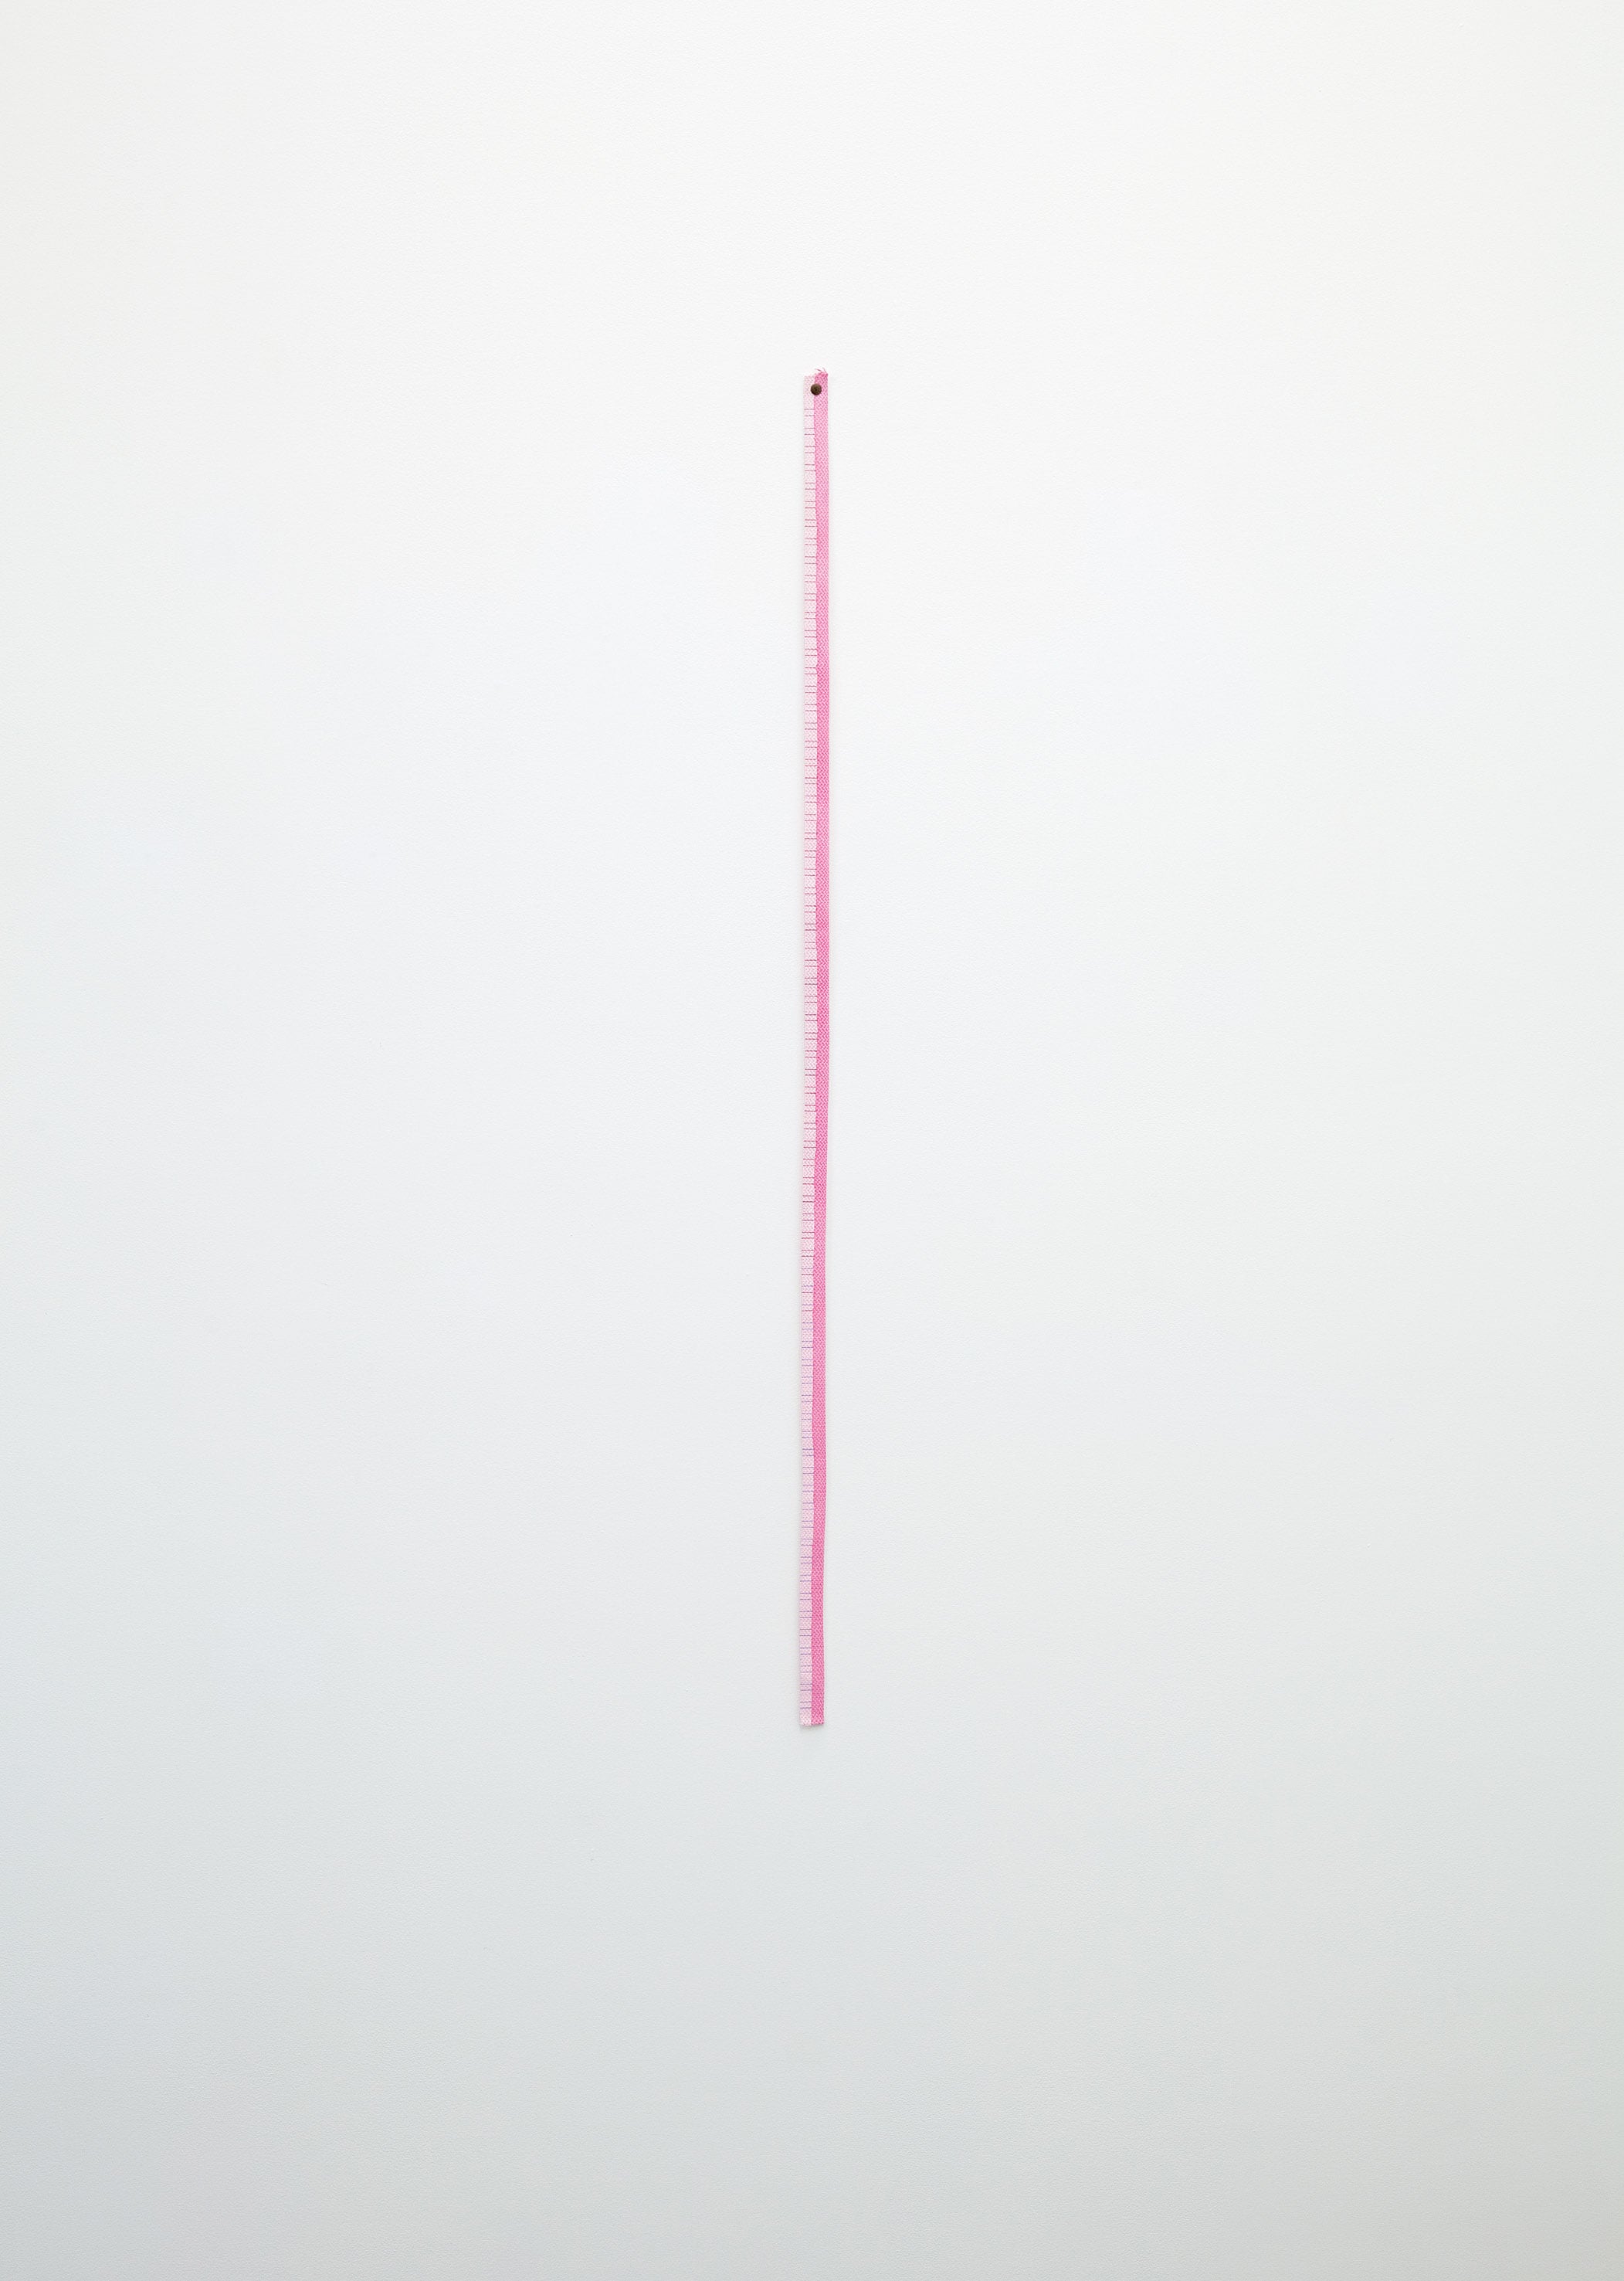 <strong>Patrick Lundberg</strong><br><em>Untitled</em> 2011<br>gesso, gouache and coloured pencil on shoelace<br>111.0 × 2.0 cm<br>Courtesy the artist and Robert Heald Gallery<br>Photo credit: Shaun Waugh